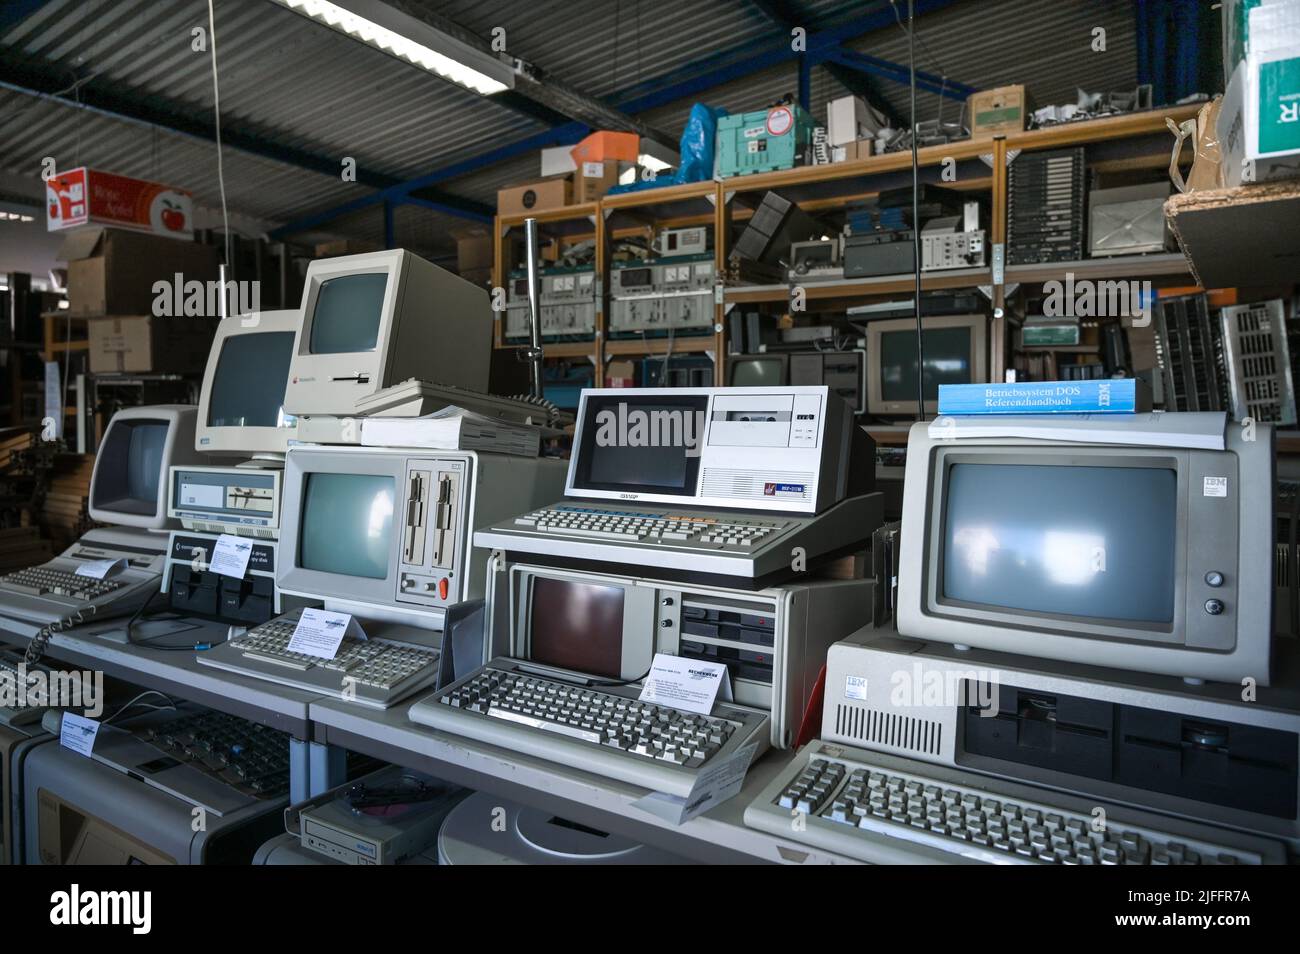 28 June 2022, Saxony-Anhalt, Halle (Saale): Personal computers from the 80's from Commodore, Sharp and IBM. The Rechenwerk - Computermuseum Halle shows devices of computing and automation technology mainly from East Germany. (to dpa 'Unique memories of the beginning of the computer age') Photo: Heiko Rebsch/dpa Stock Photo